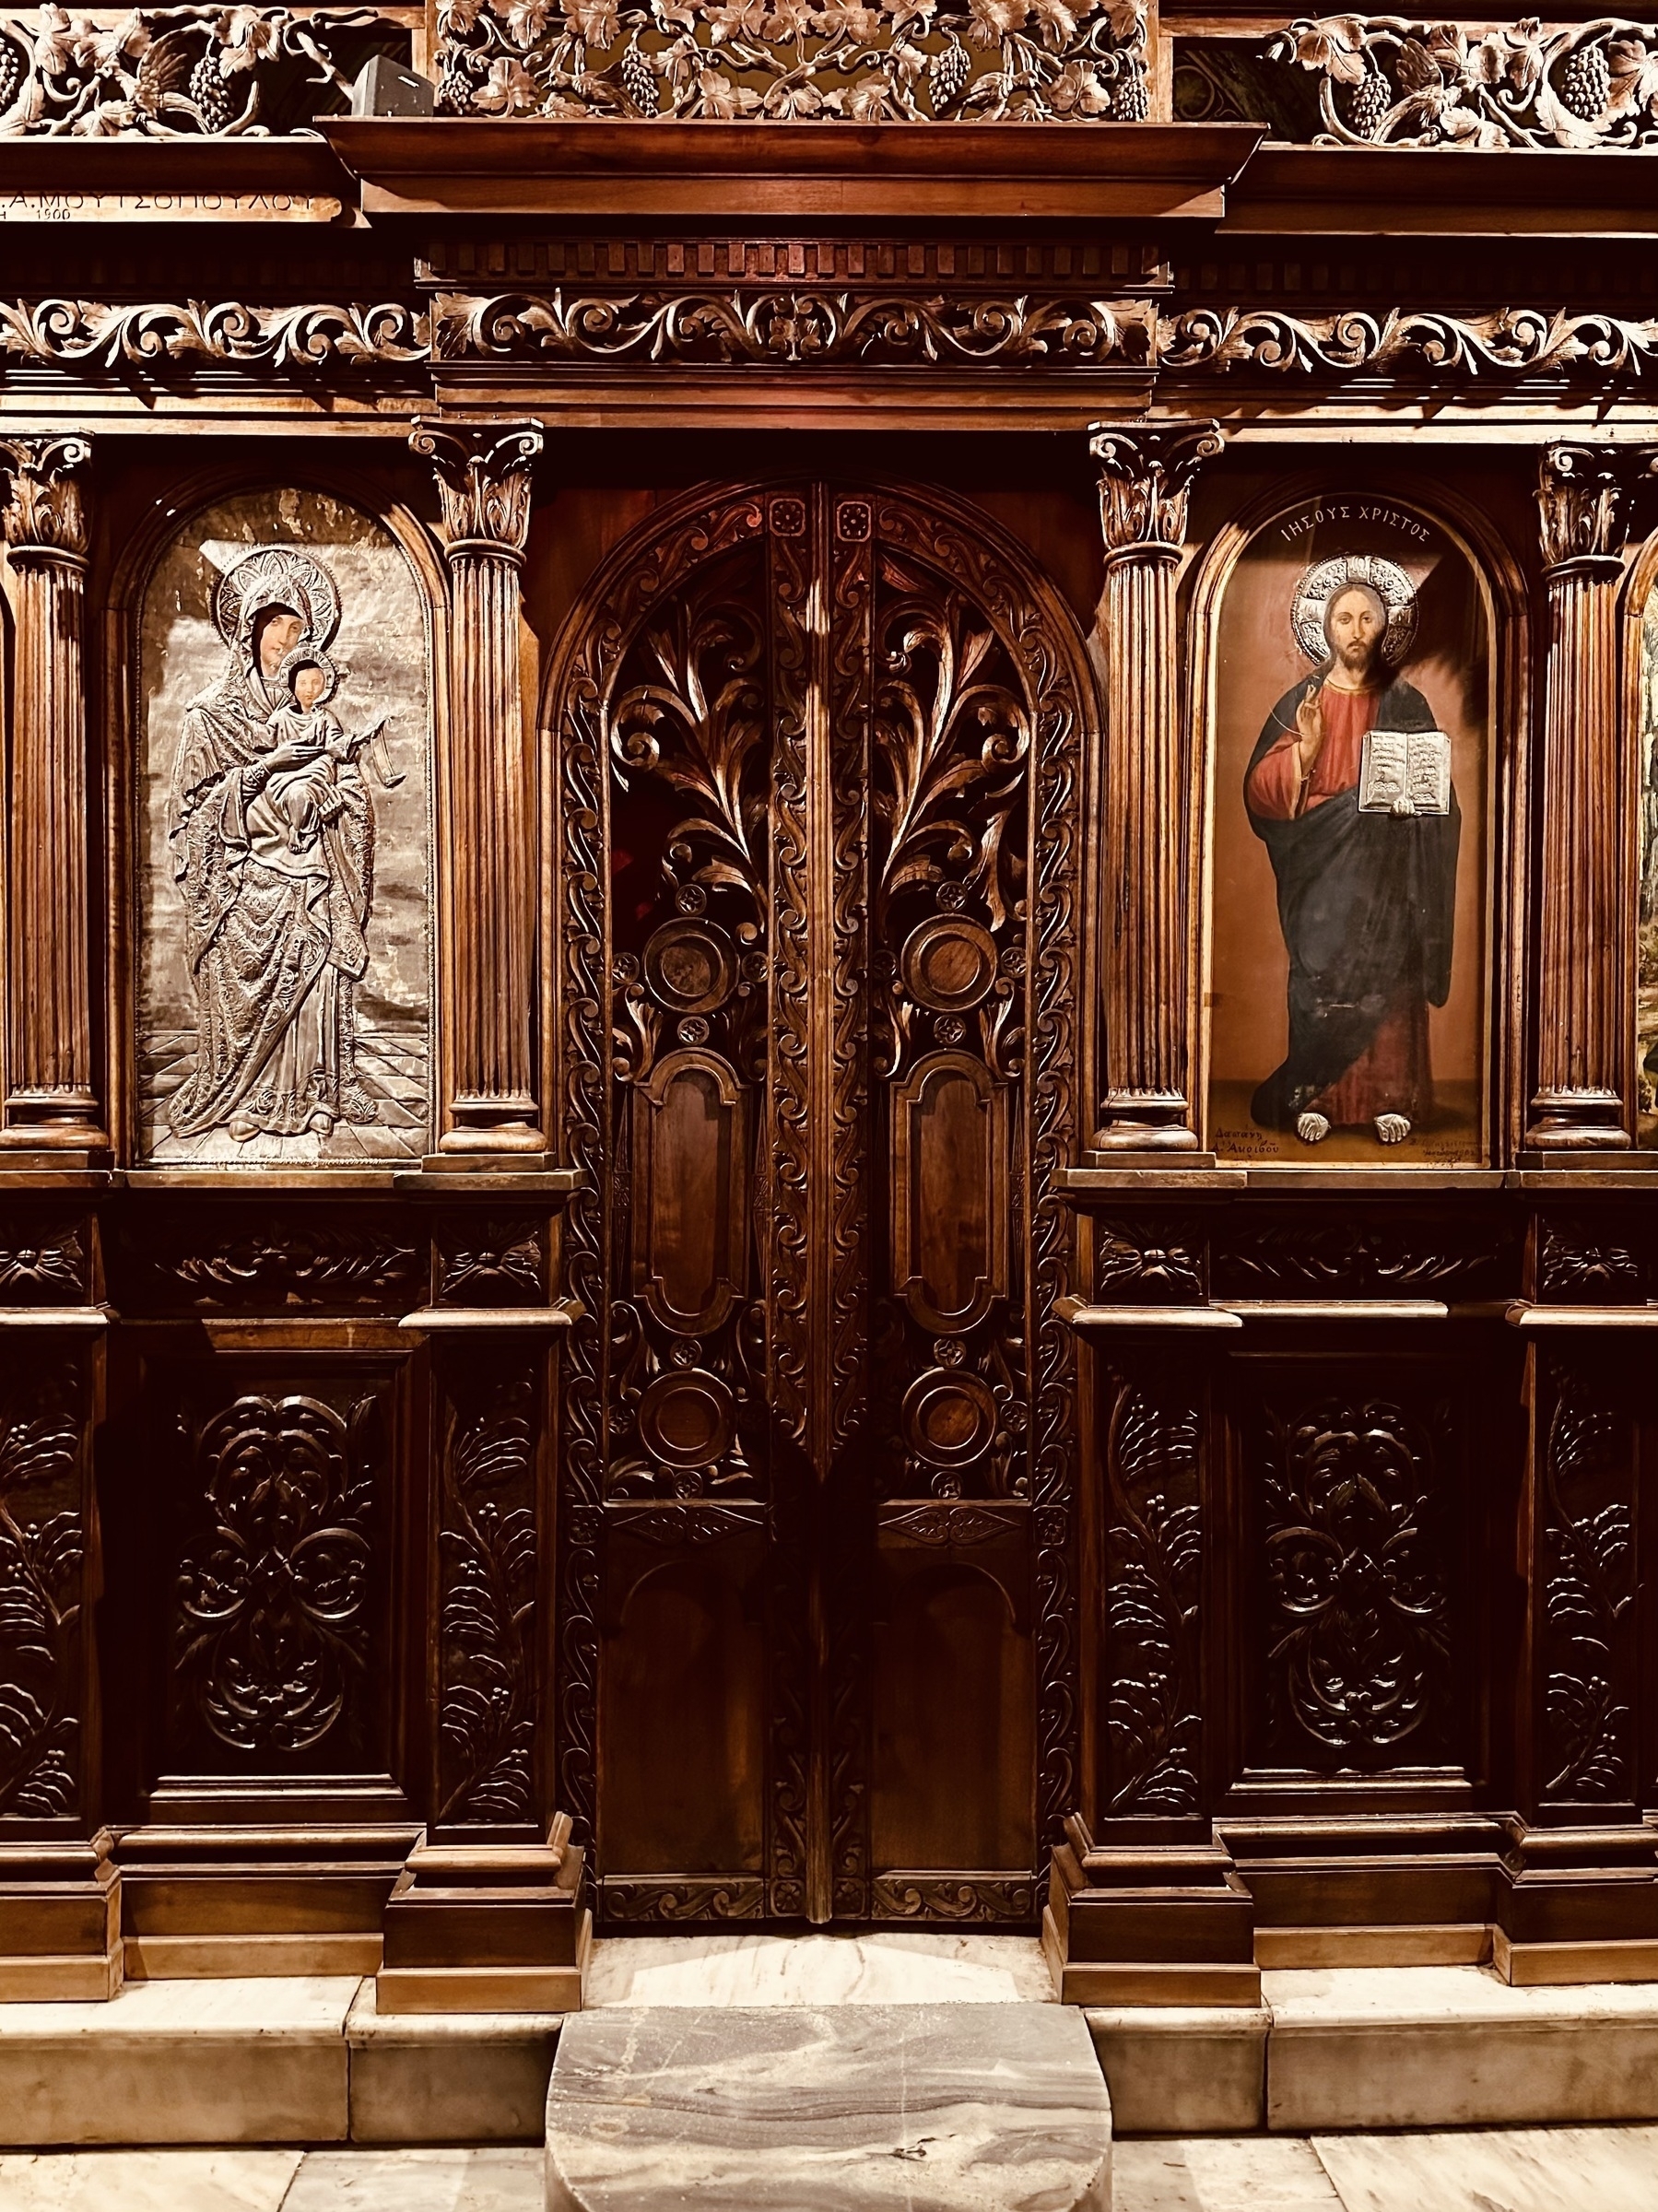 An ornately carved arched wooden door in a carved wooden wall, with religious icons to the left and right of it.